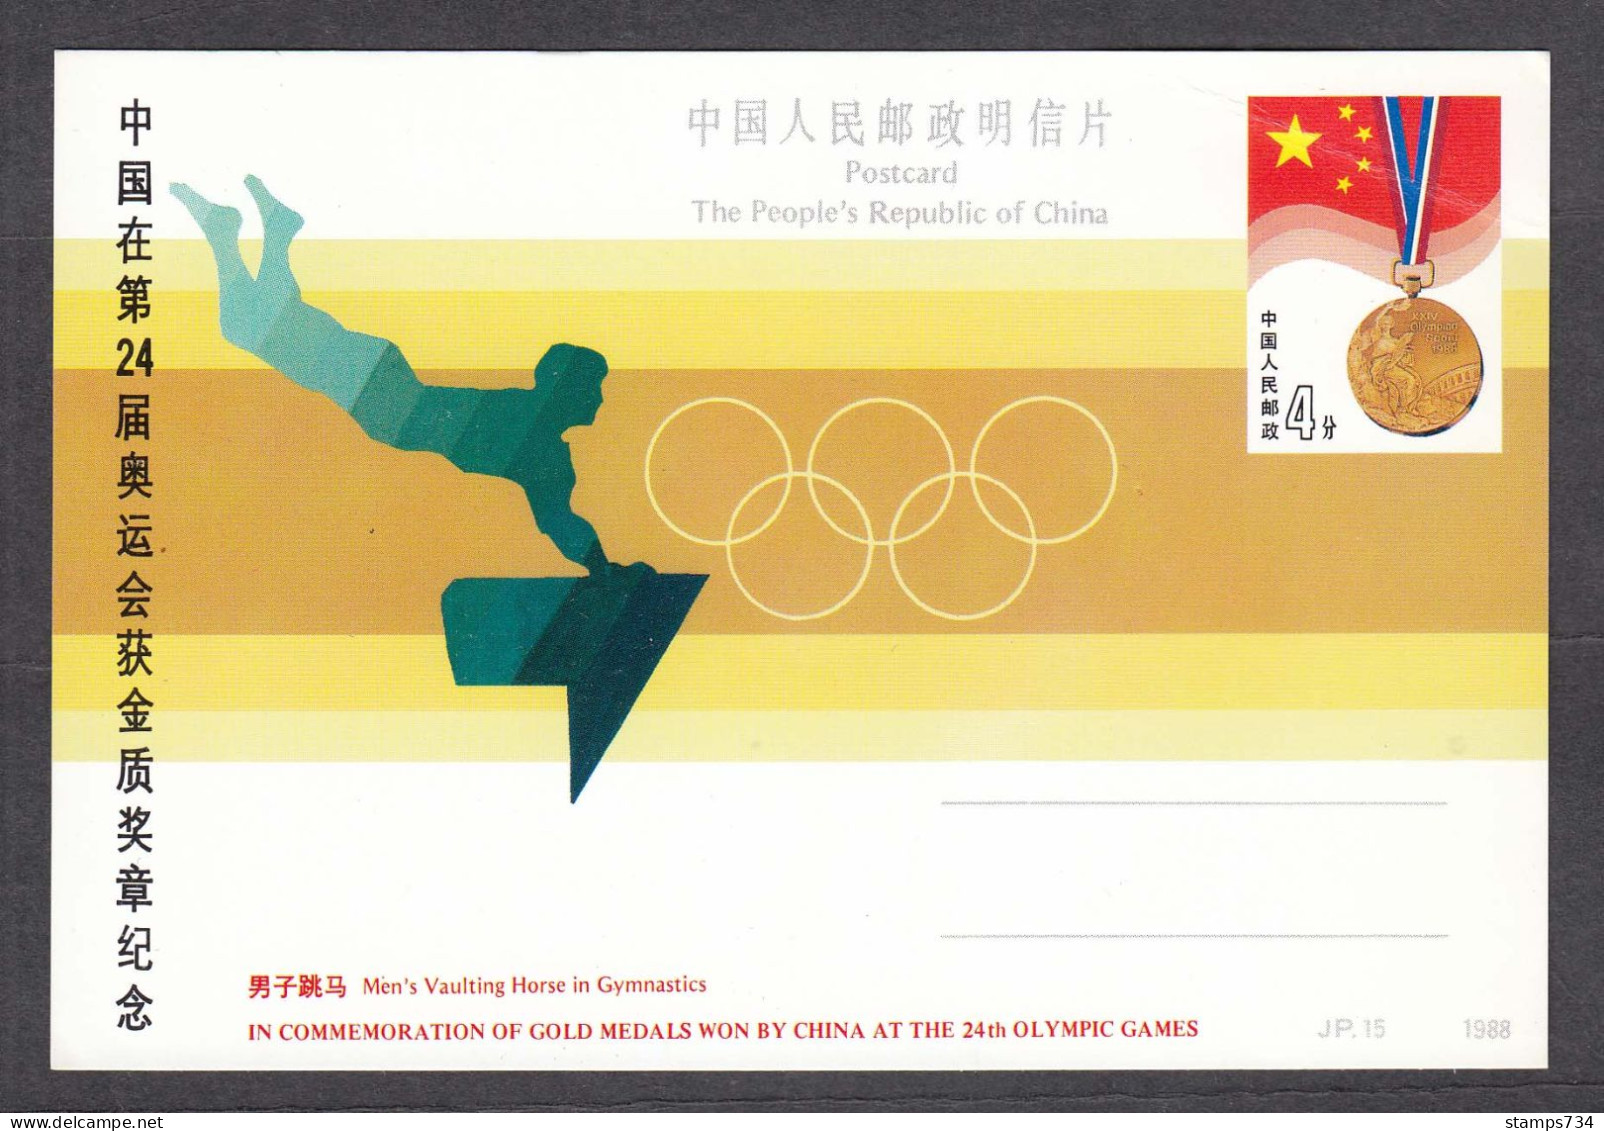 China 1988 - Gold Medals Won By China At The Olymp. Games,Seoul, Jumping On A Horse, Post. Stationery - Gymnastics